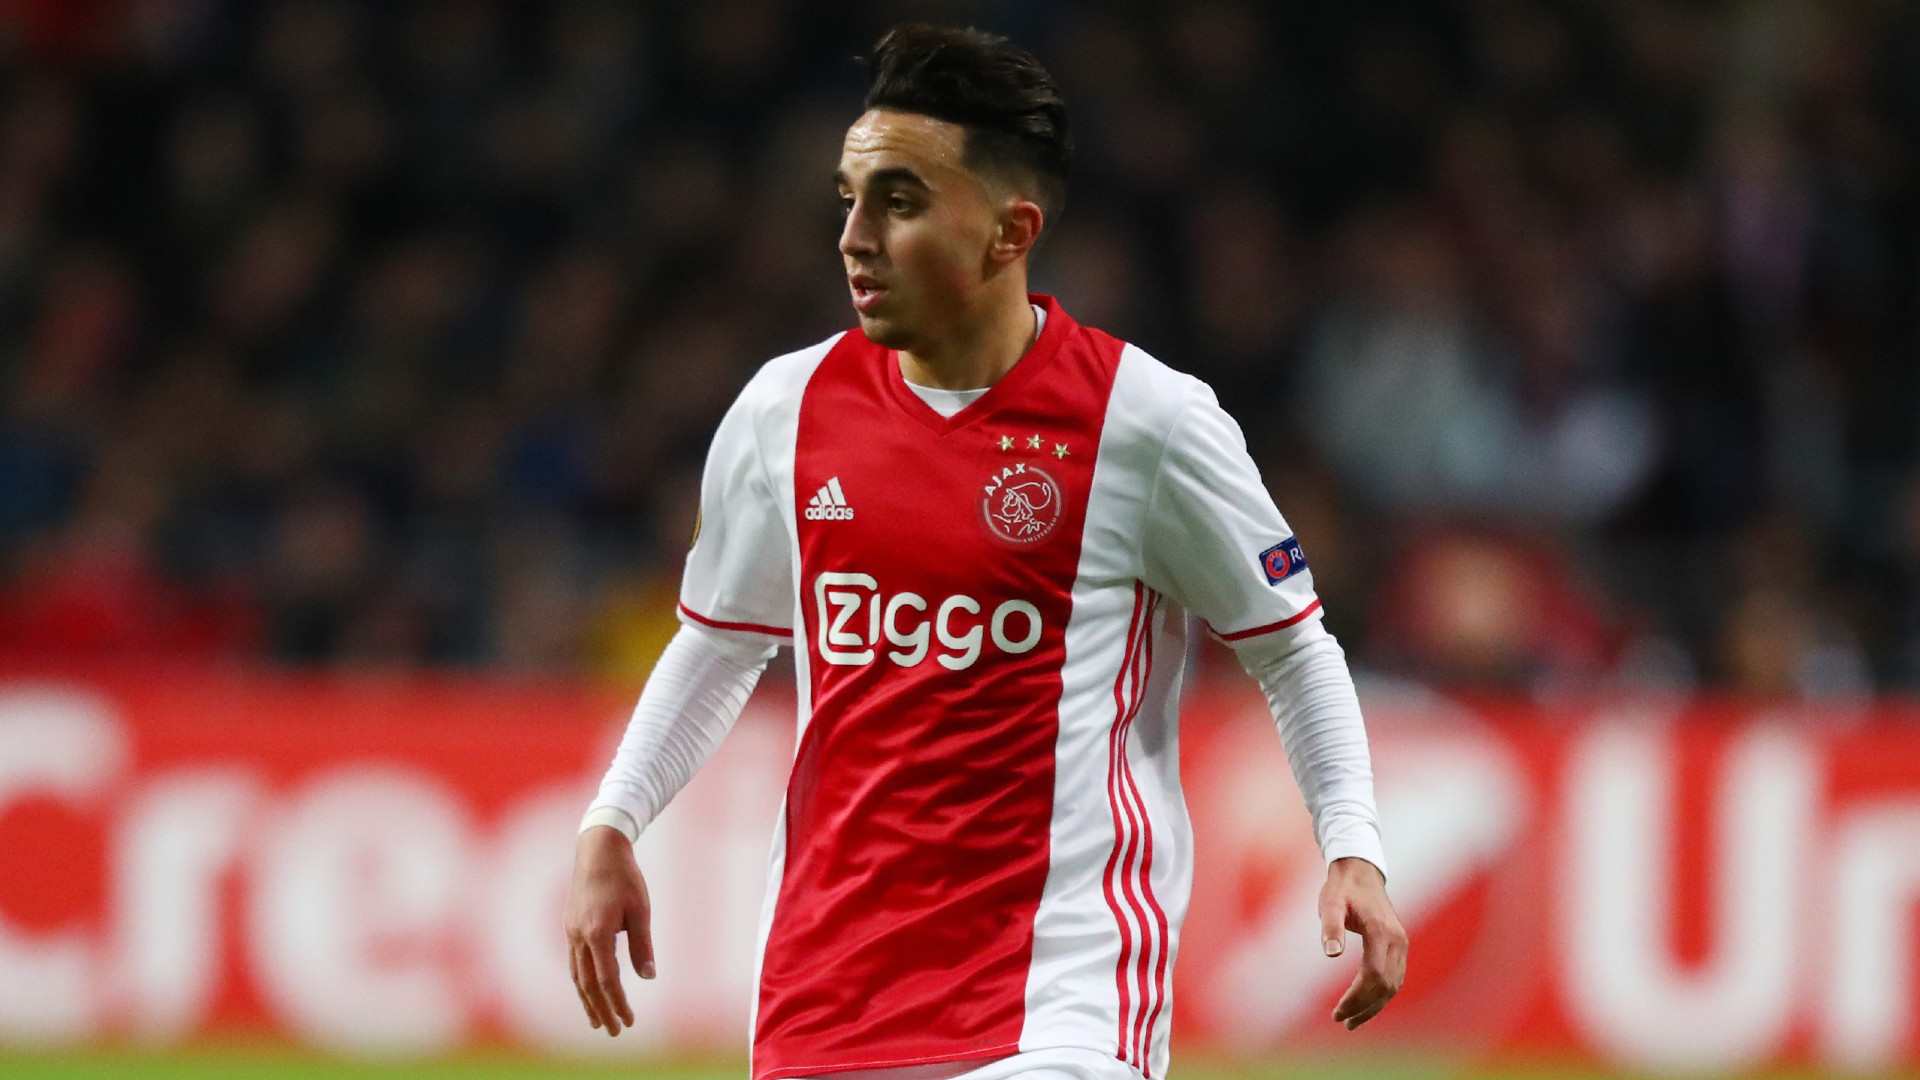 Ajax reach €7.85m compensation agreement with Appie Nouri as family continue to care for brain damaged former starlet | Goal.com